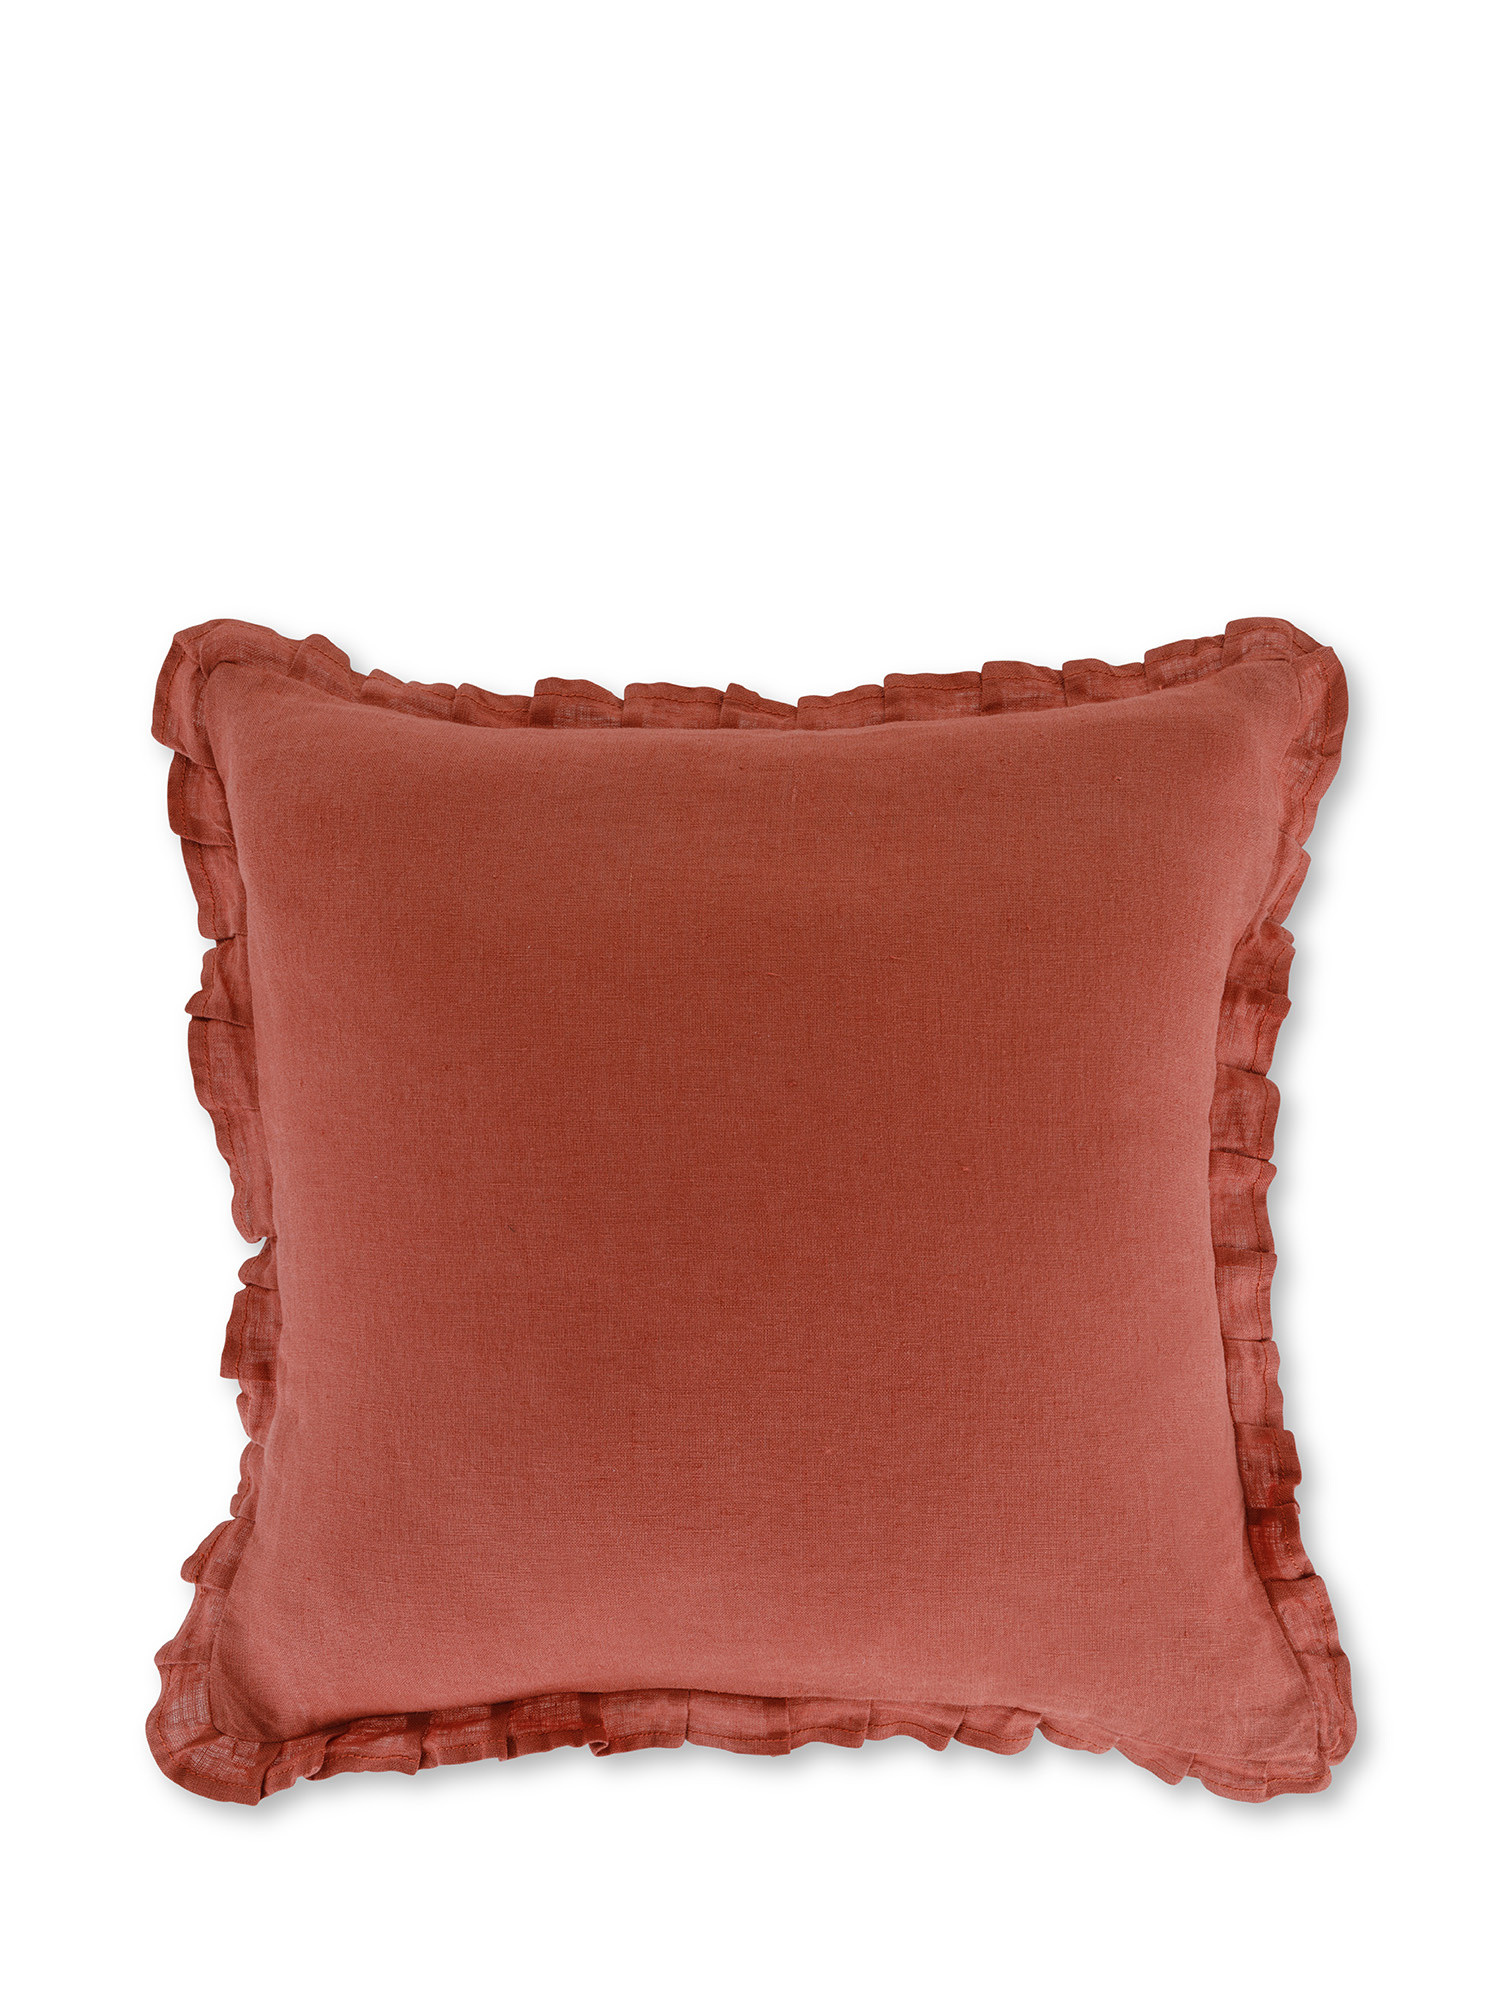 Striped cushion in pure linen 40x40 cm, Copper Brown, large image number 0